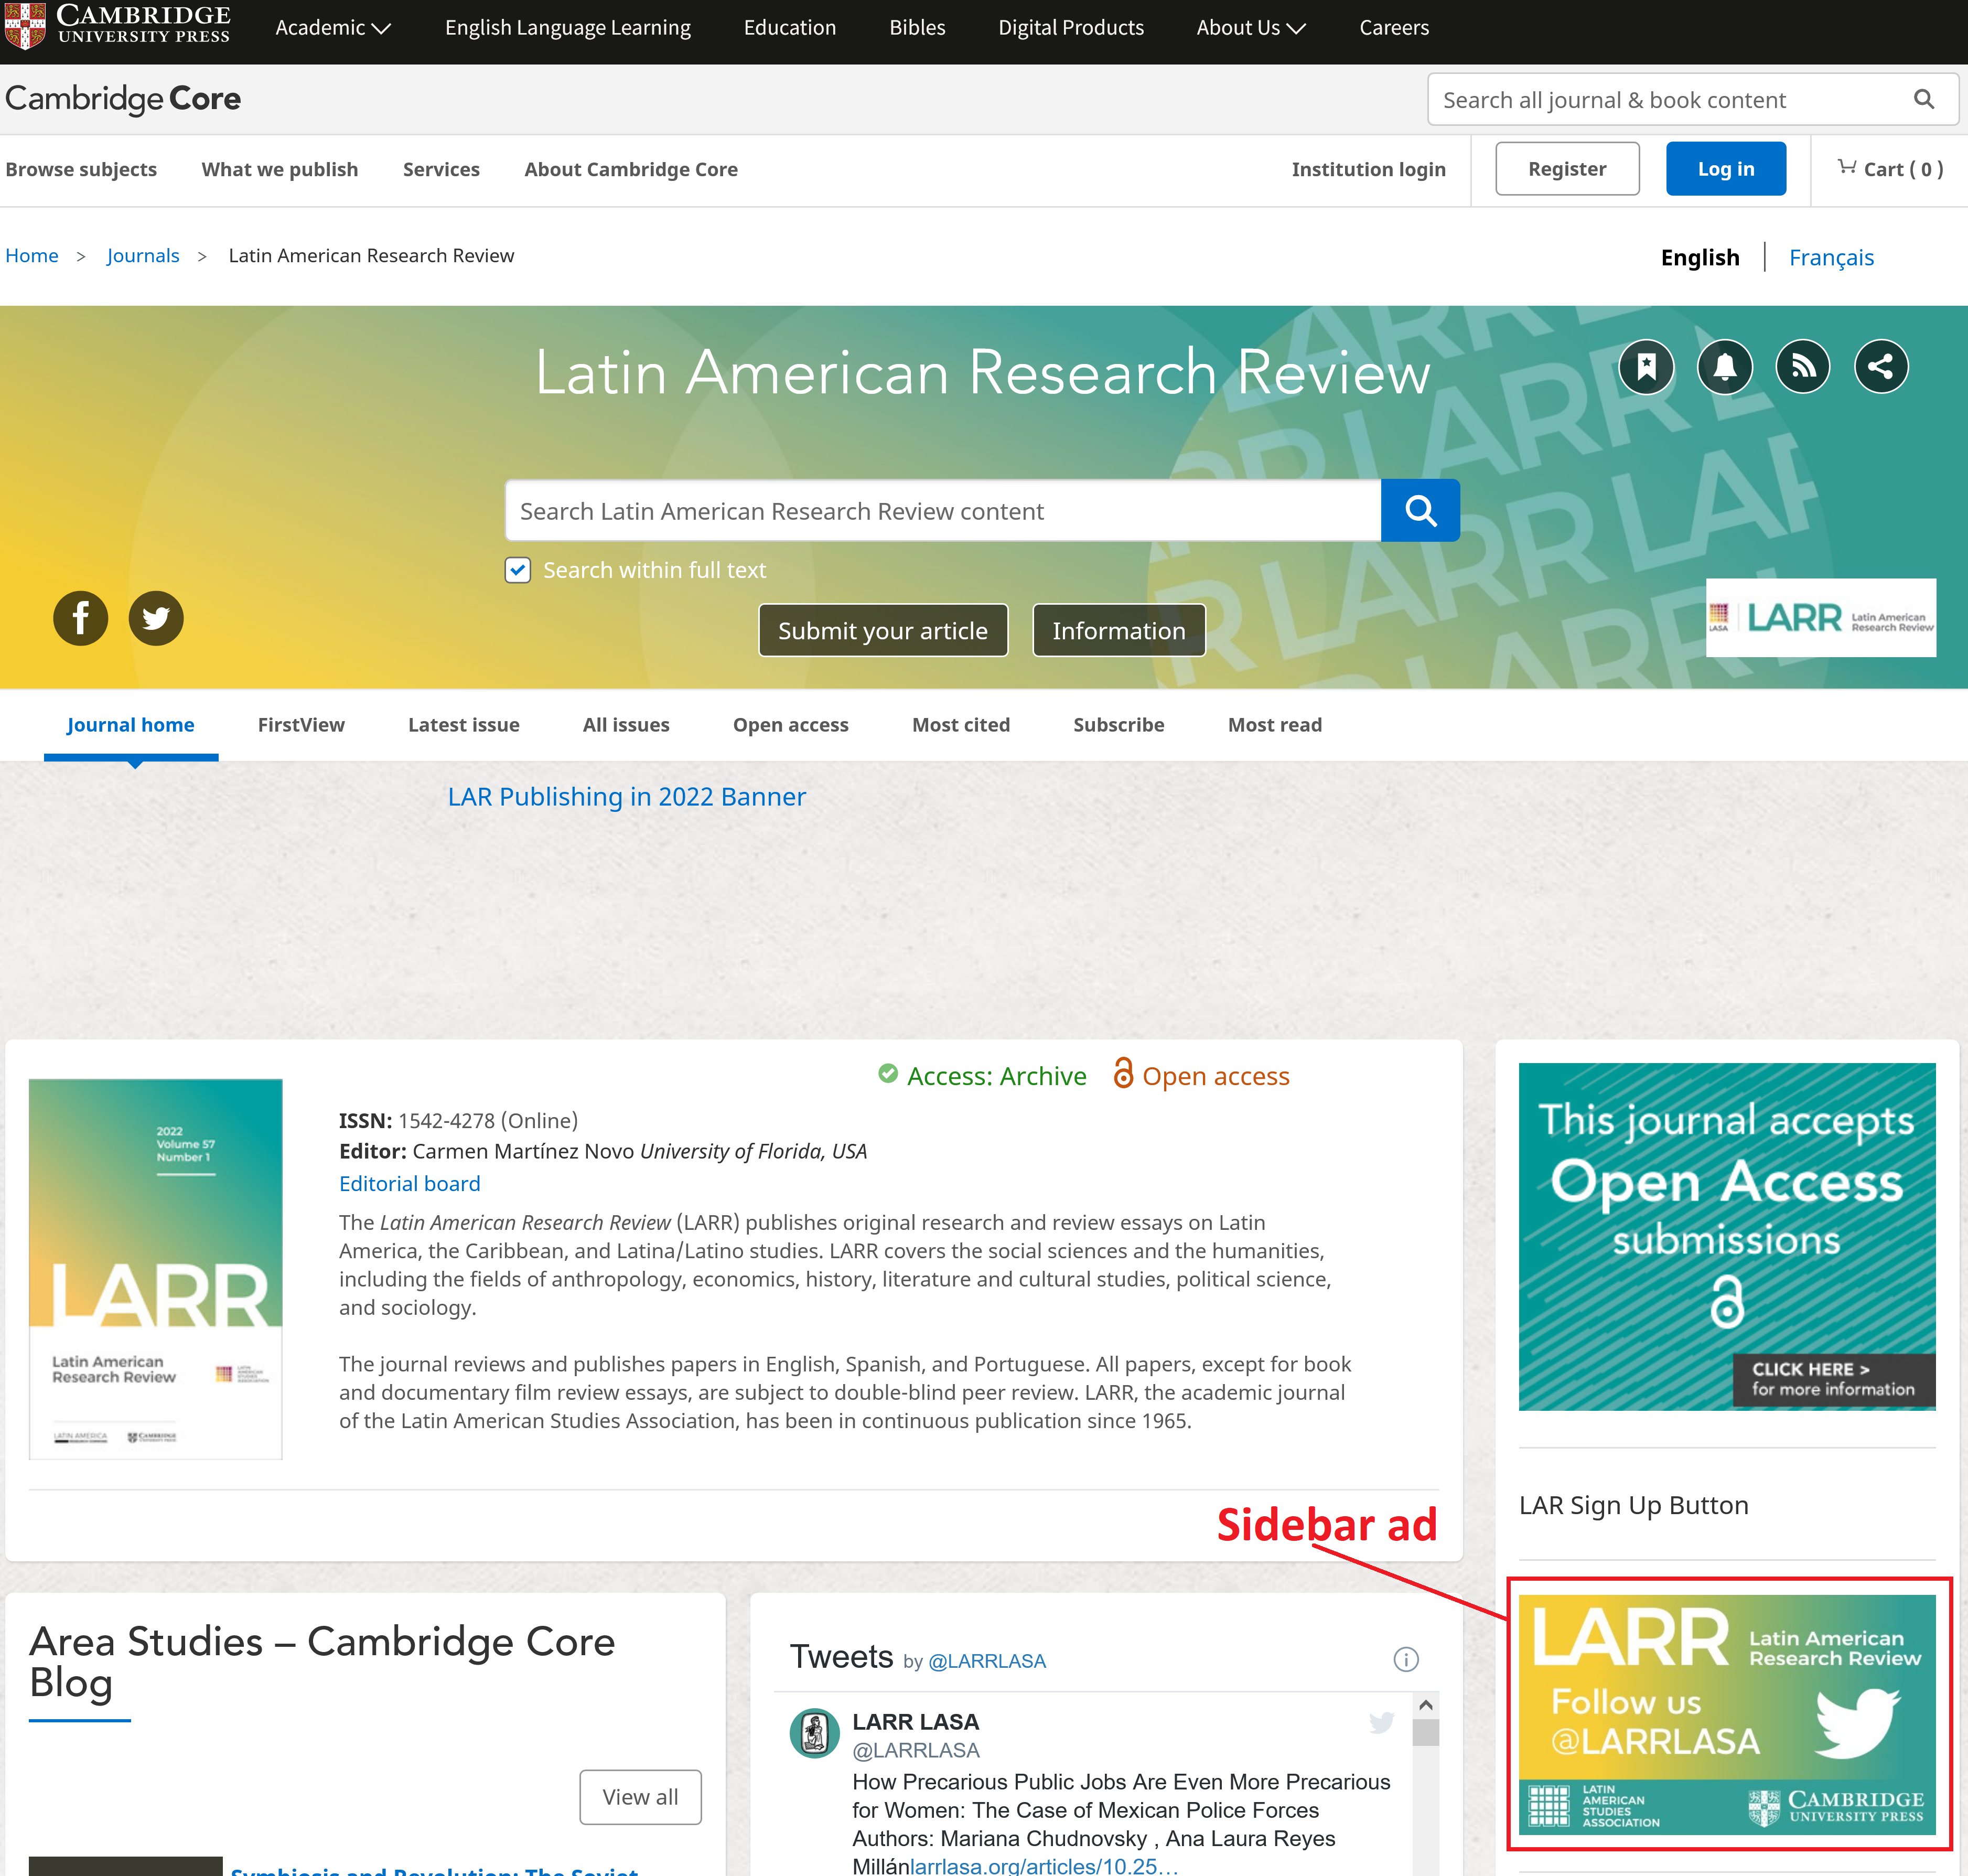 Placement of sidebar ads on LARR home page